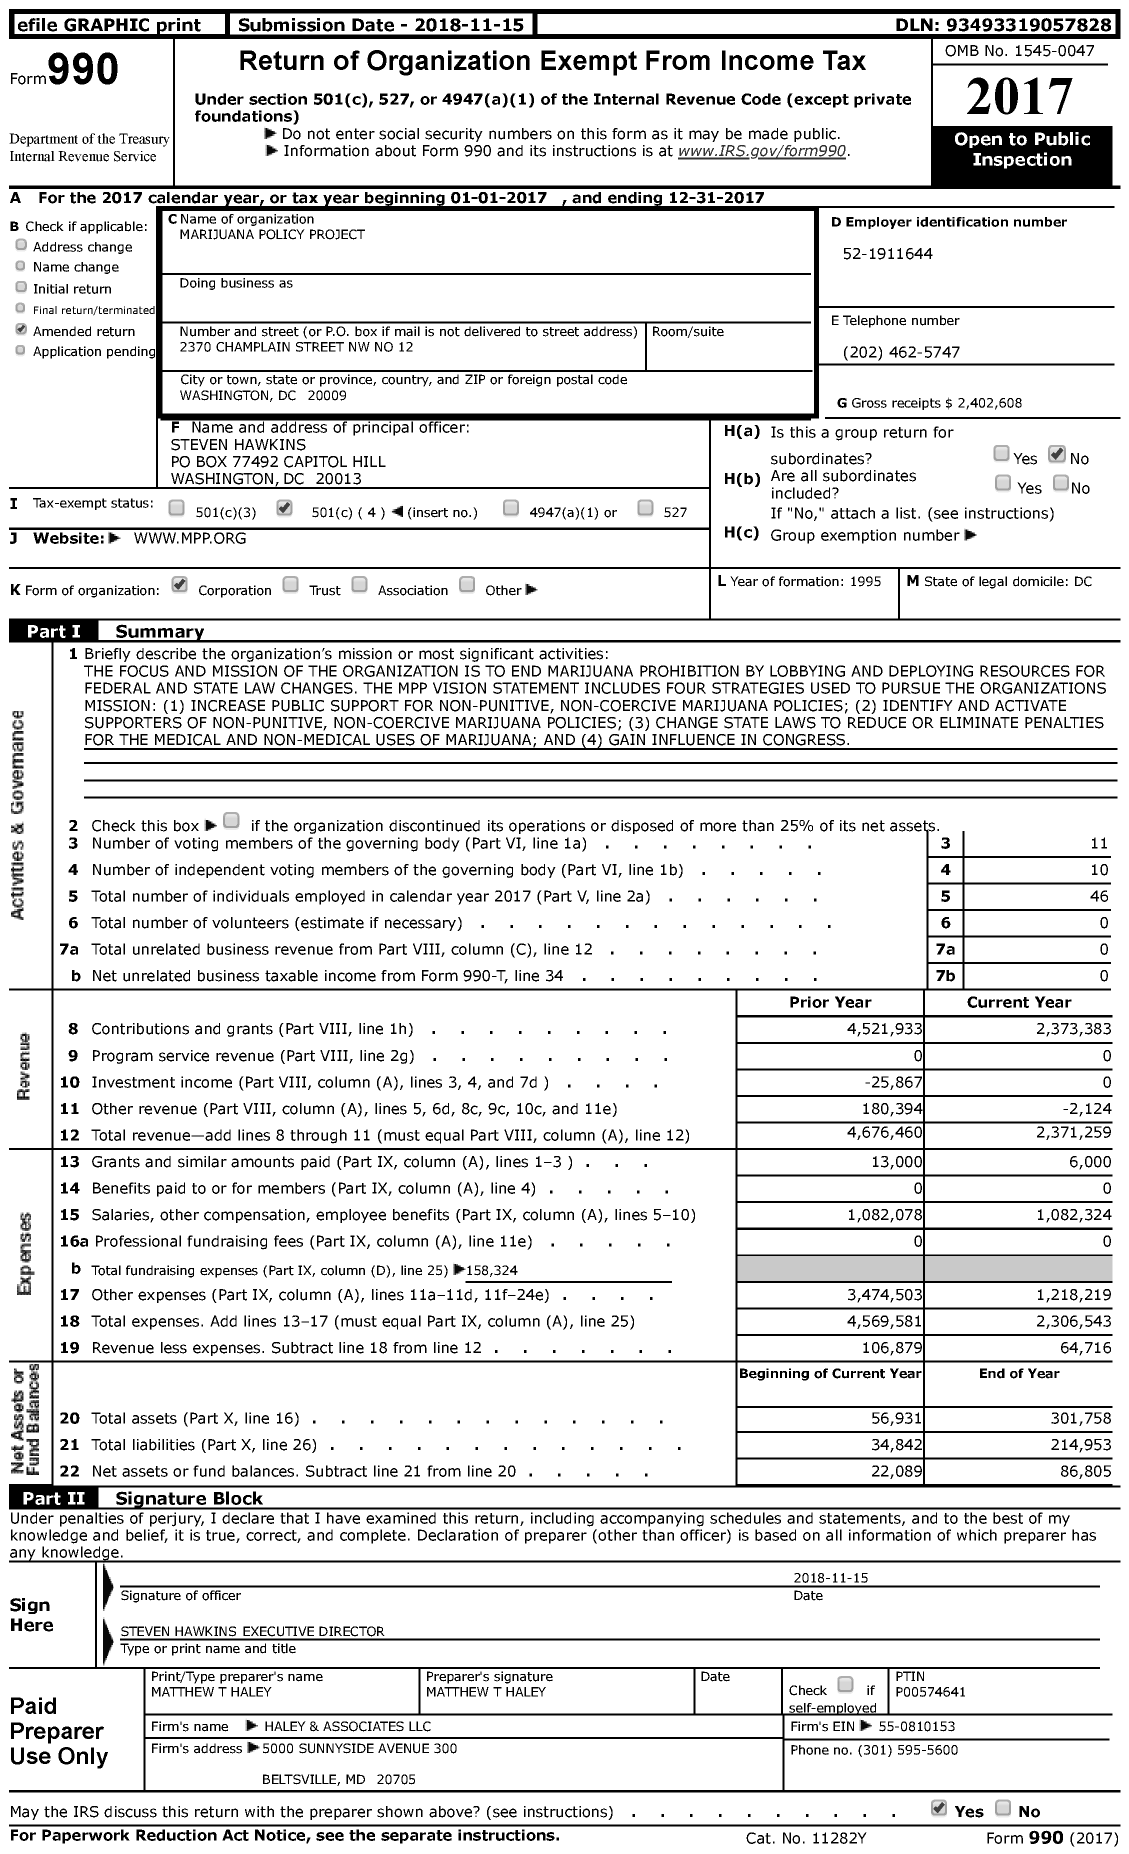 Image of first page of 2017 Form 990 for Marijuana Policy Project (MPP)